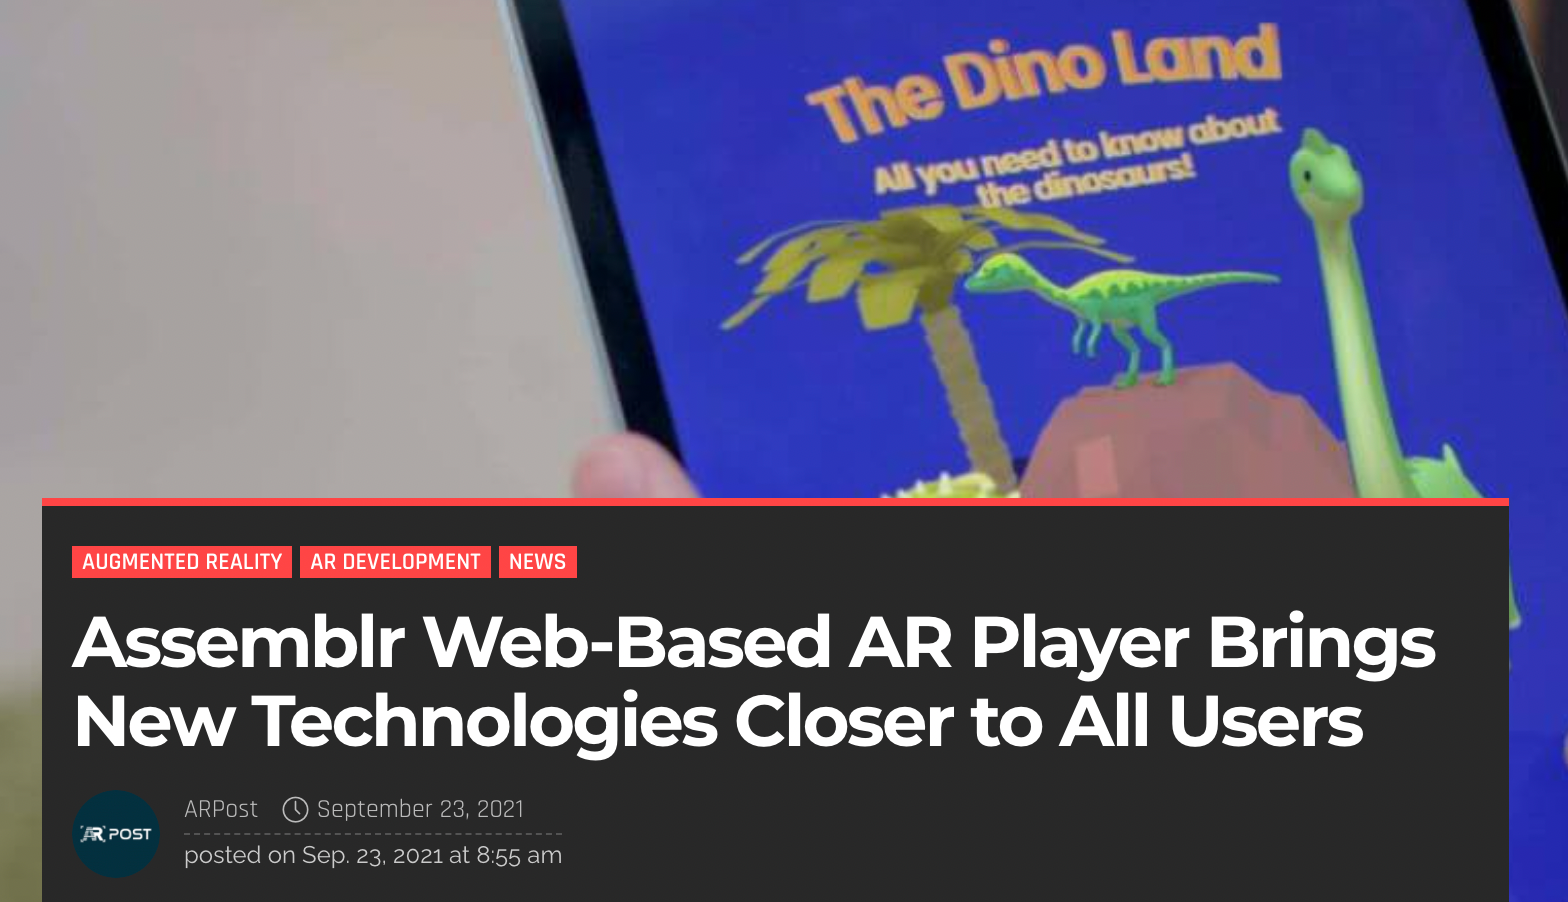 Assemblr Web-Based AR Player Brings New Technologies Closer to All Users